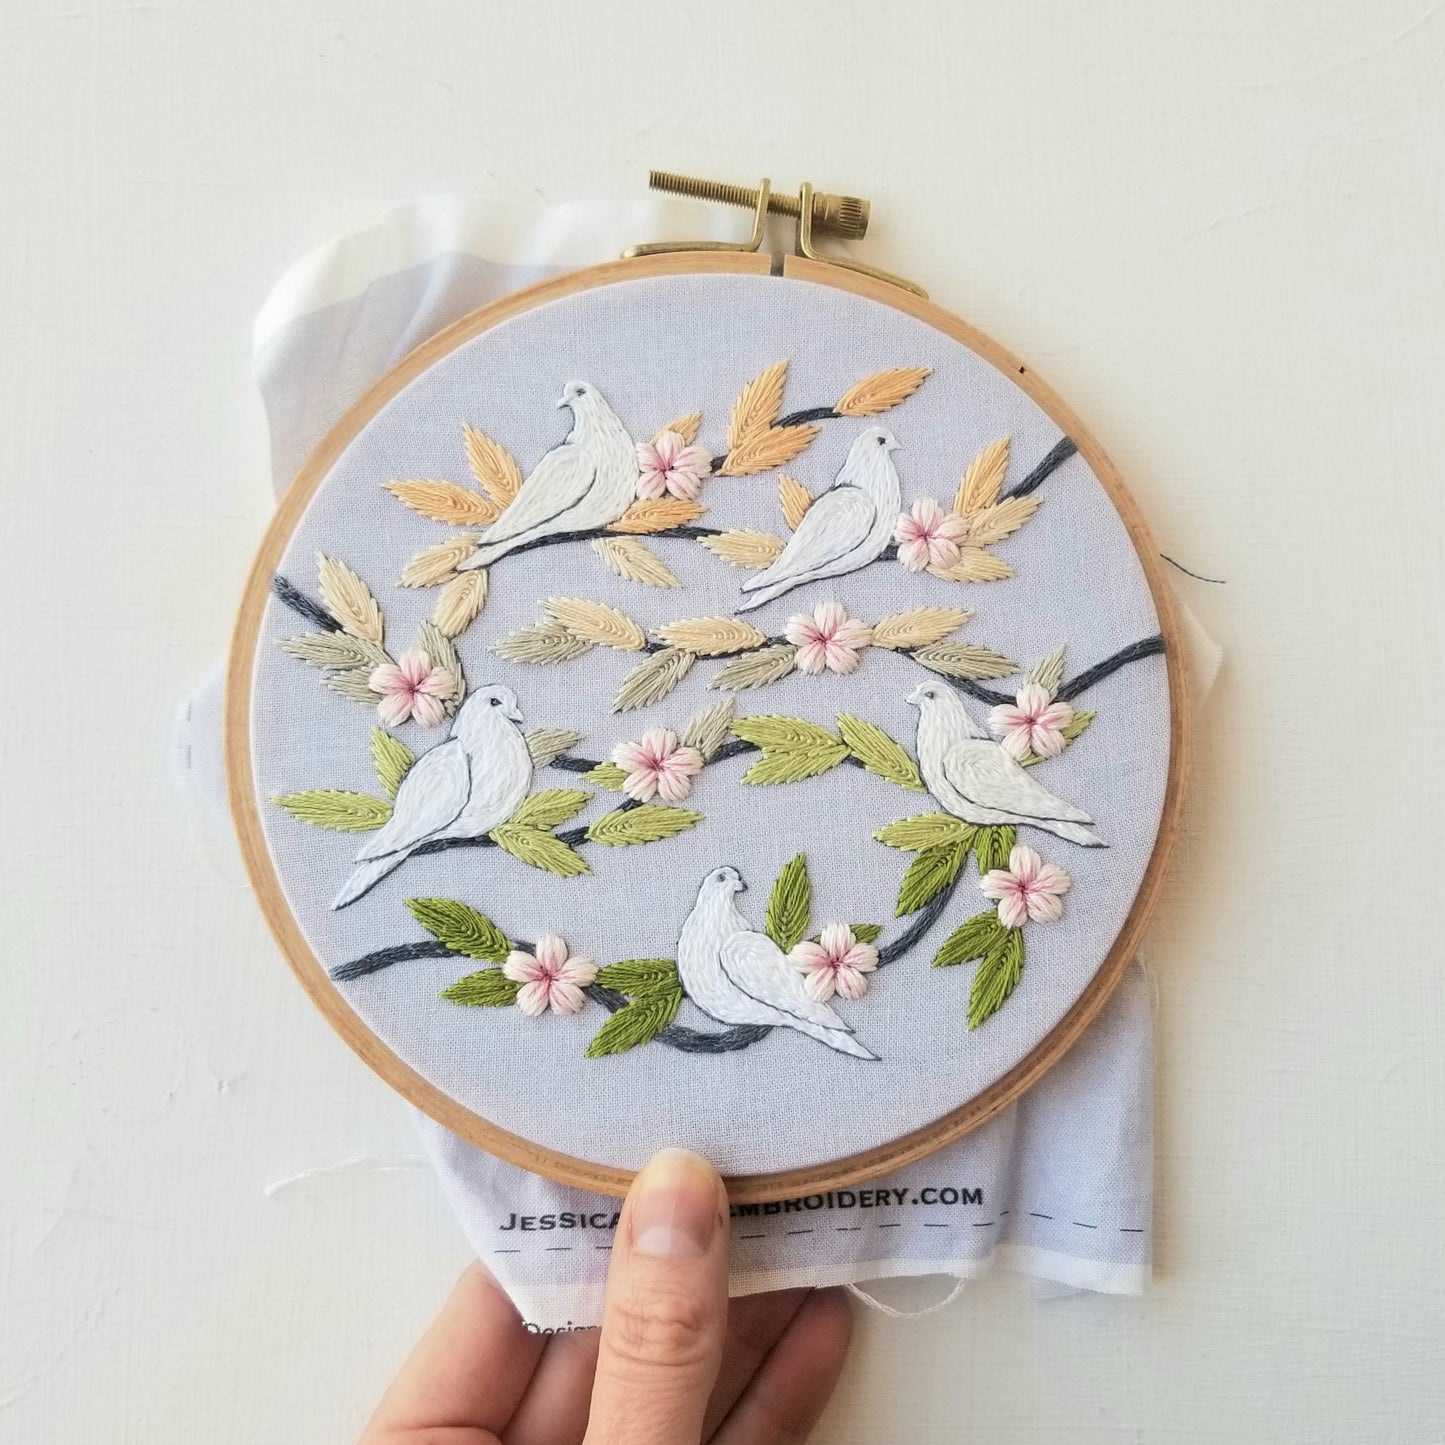 Peaceful Doves Embroidery Kit